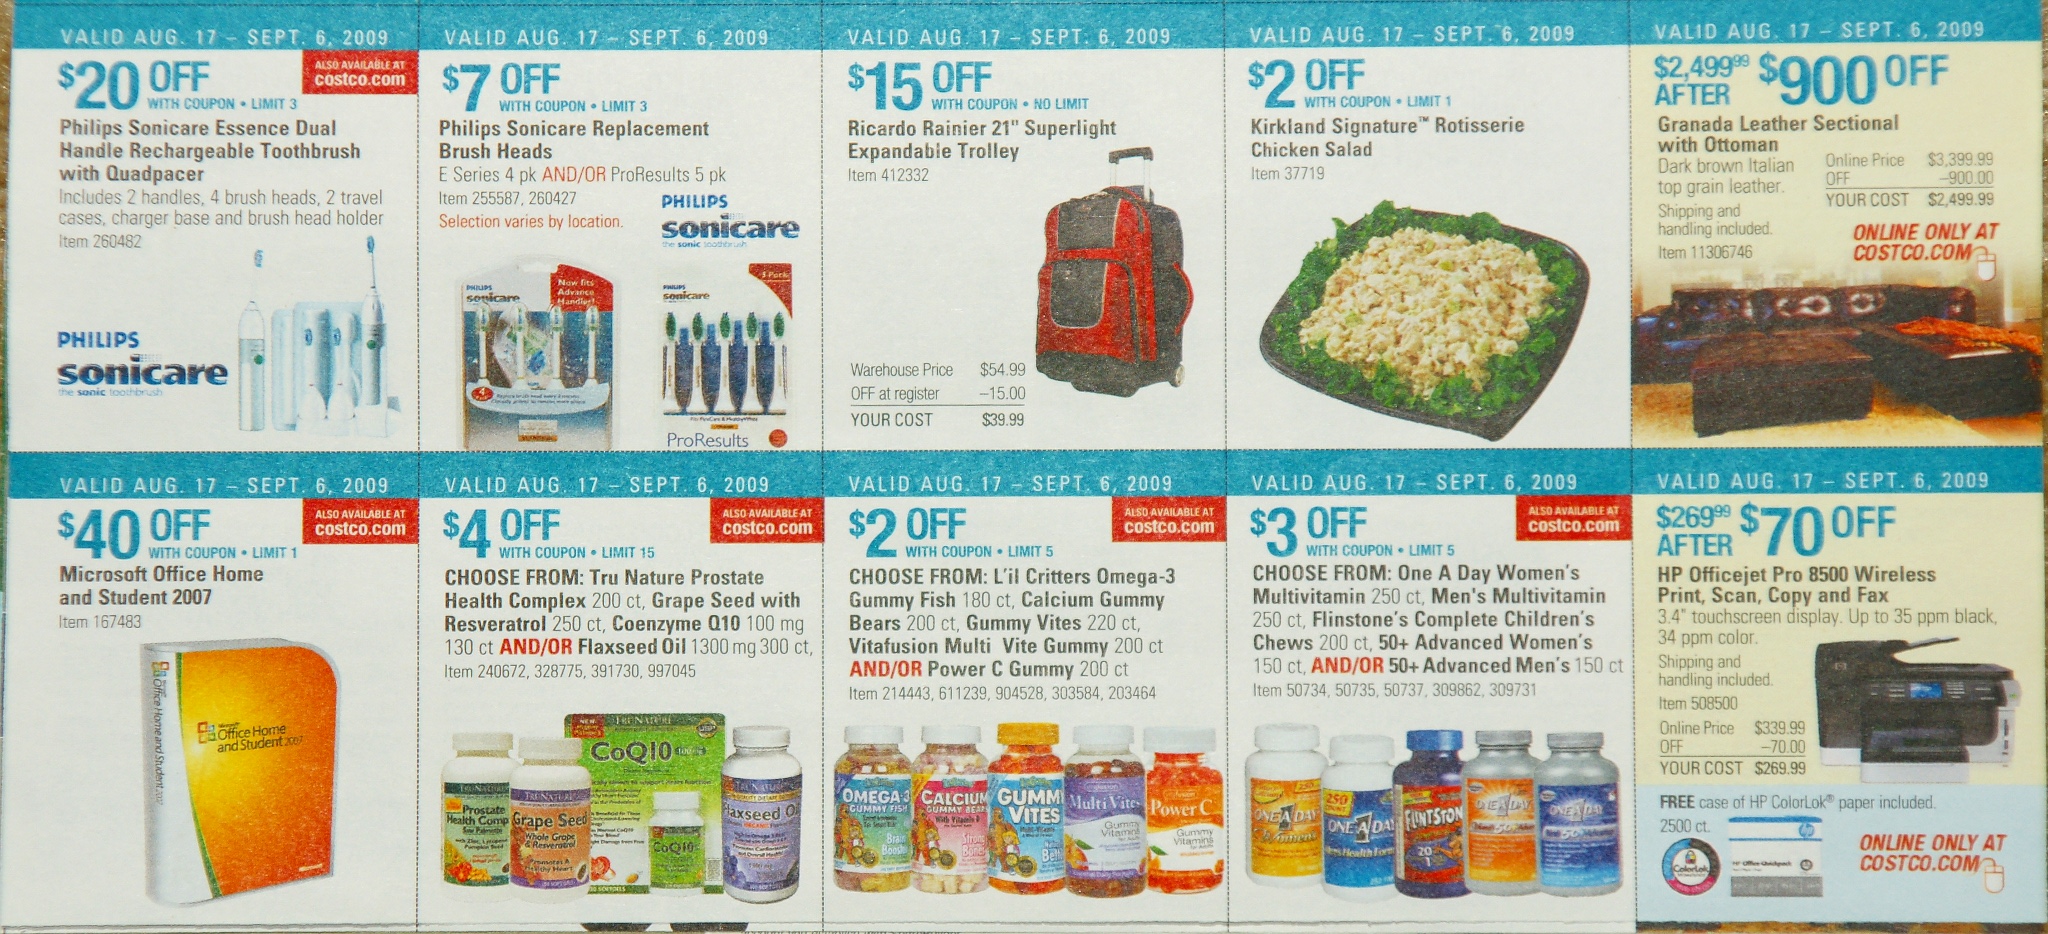 Full image coupon book page ->9<-